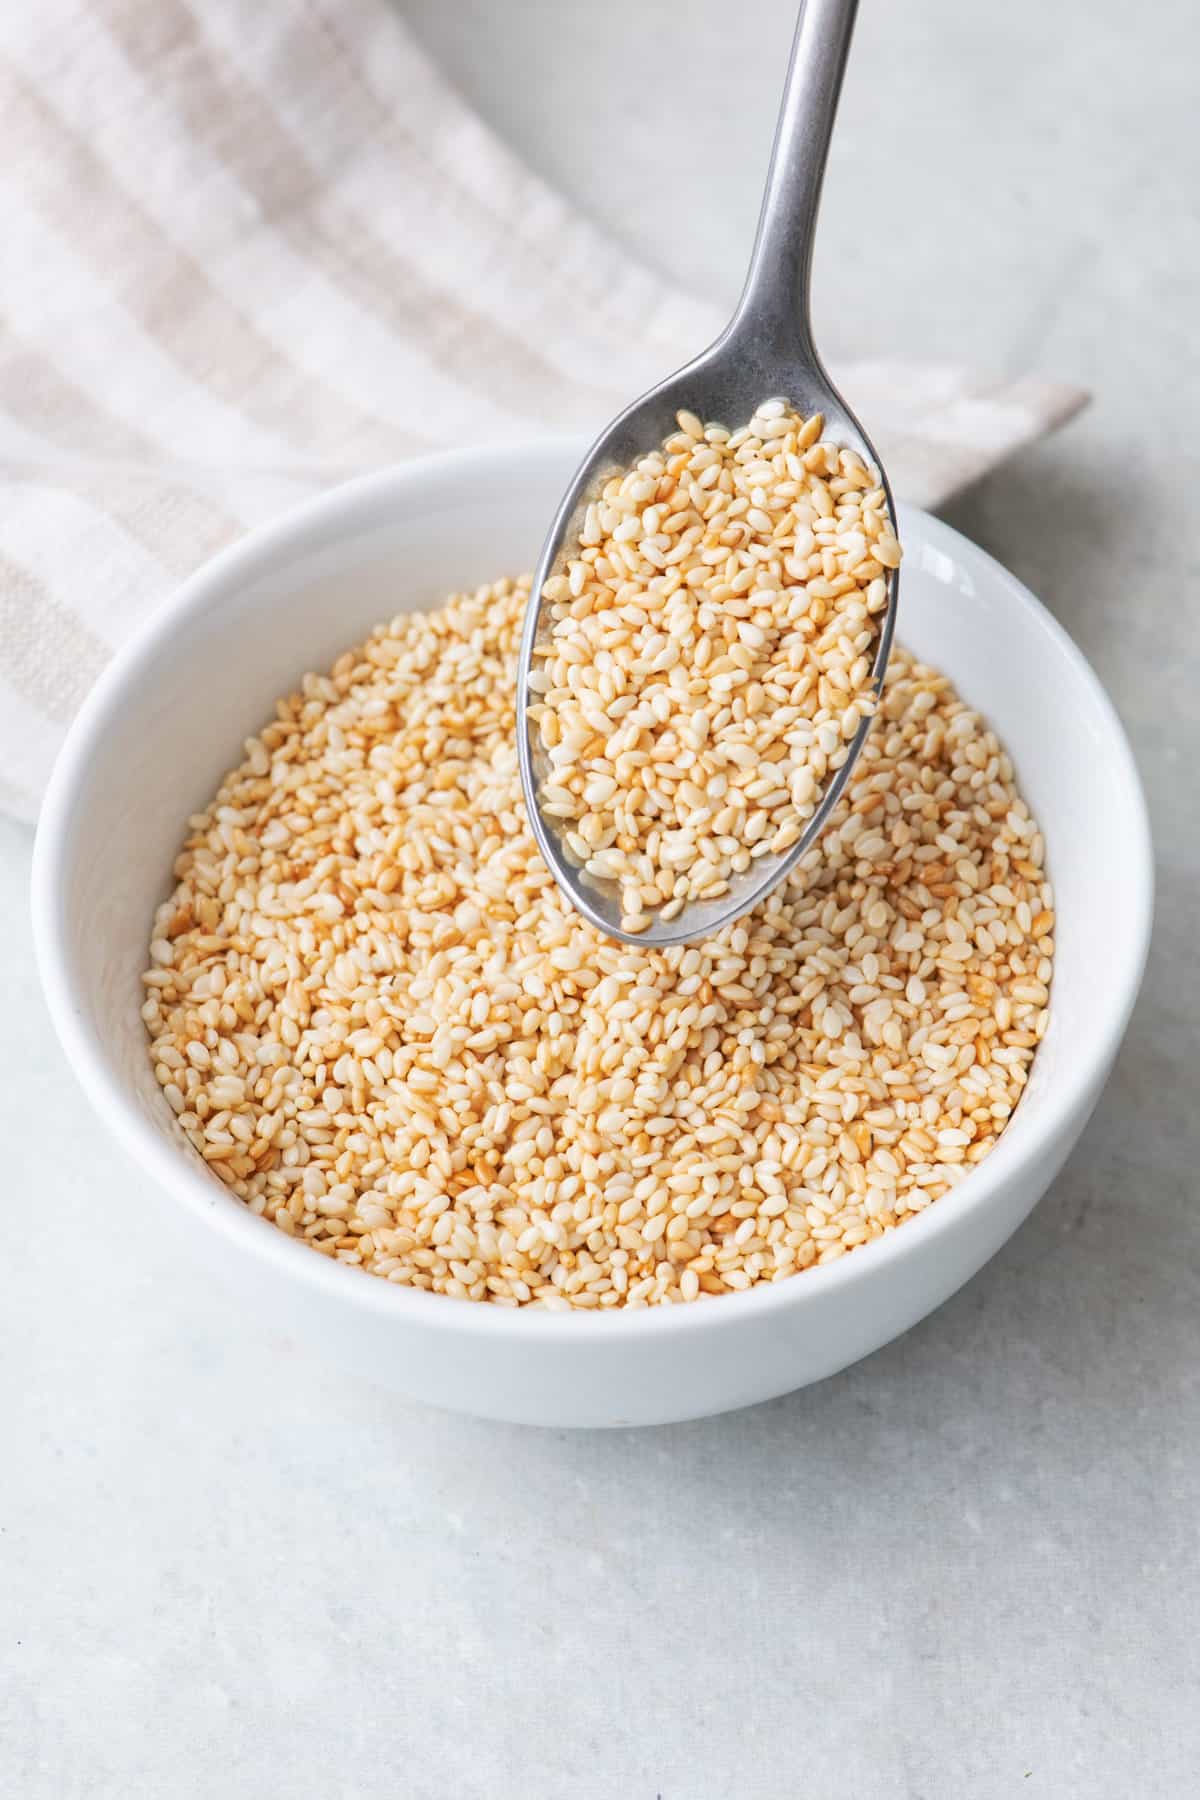 Spoon lifting up a spoonful of toasted sesame seeds from a small bowl